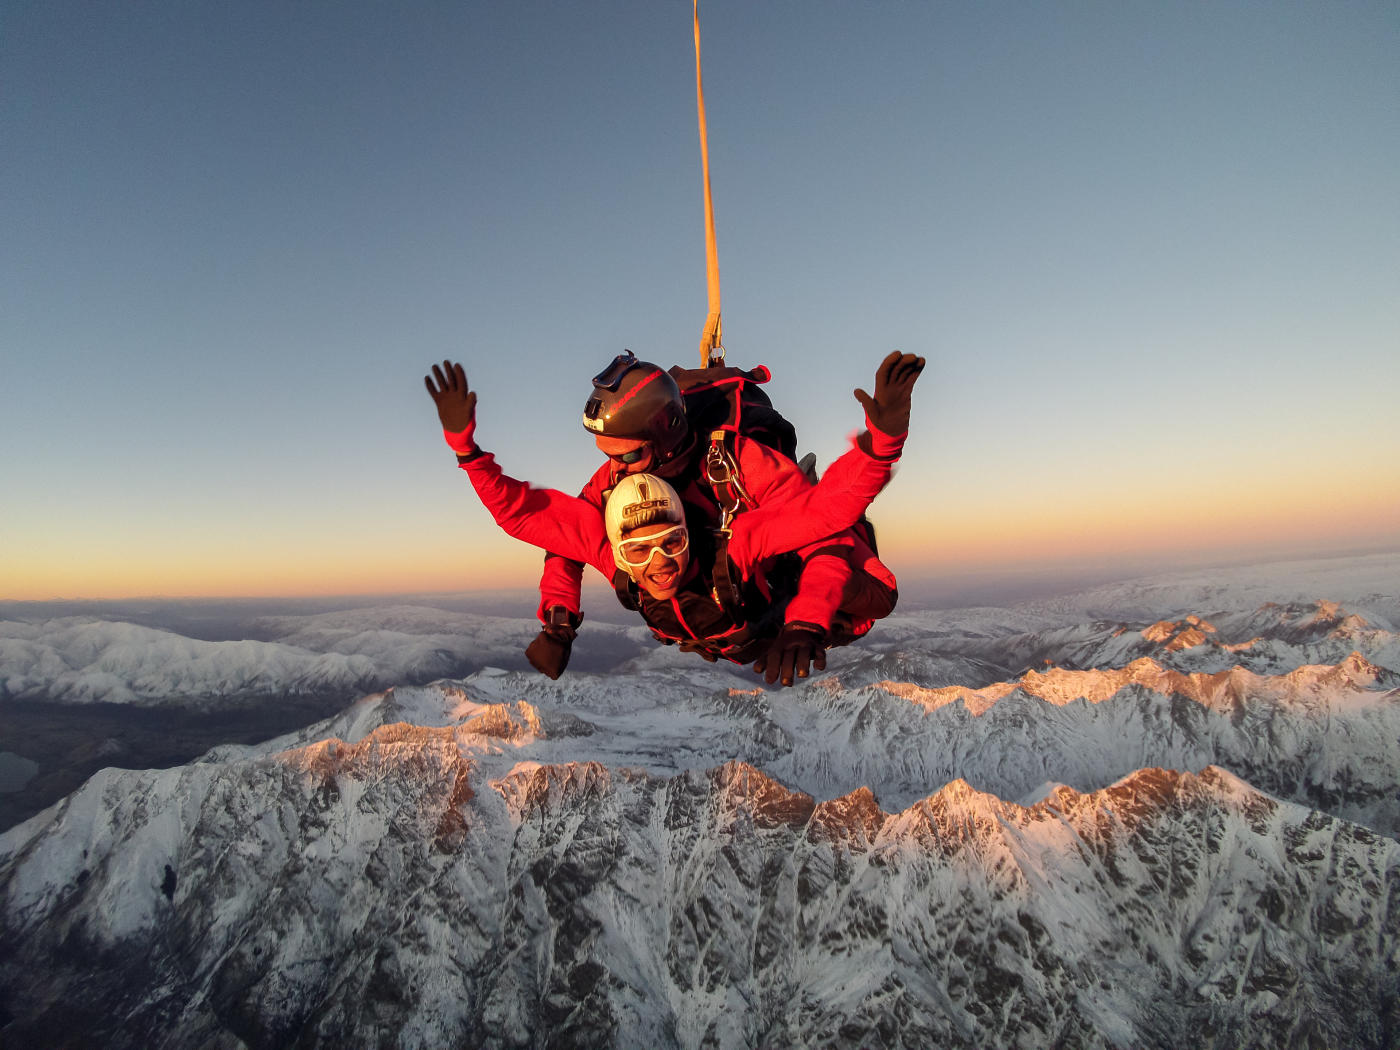 Skydiver high above snowcapped mountains of Queenstown